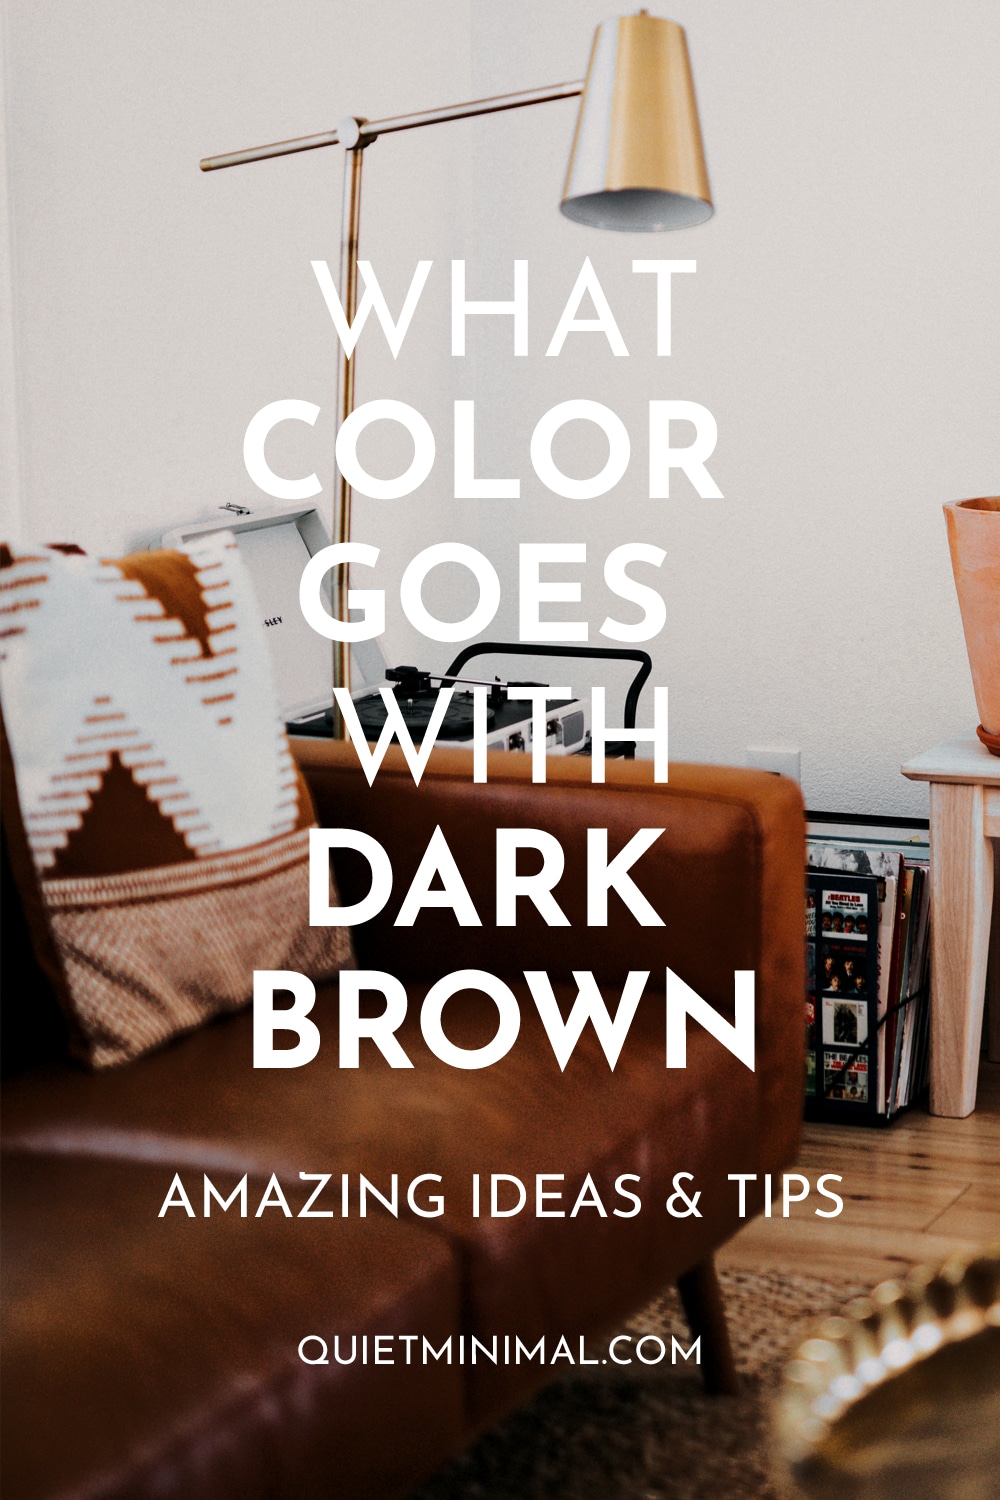 what color goes with dark brown, ideas and tips